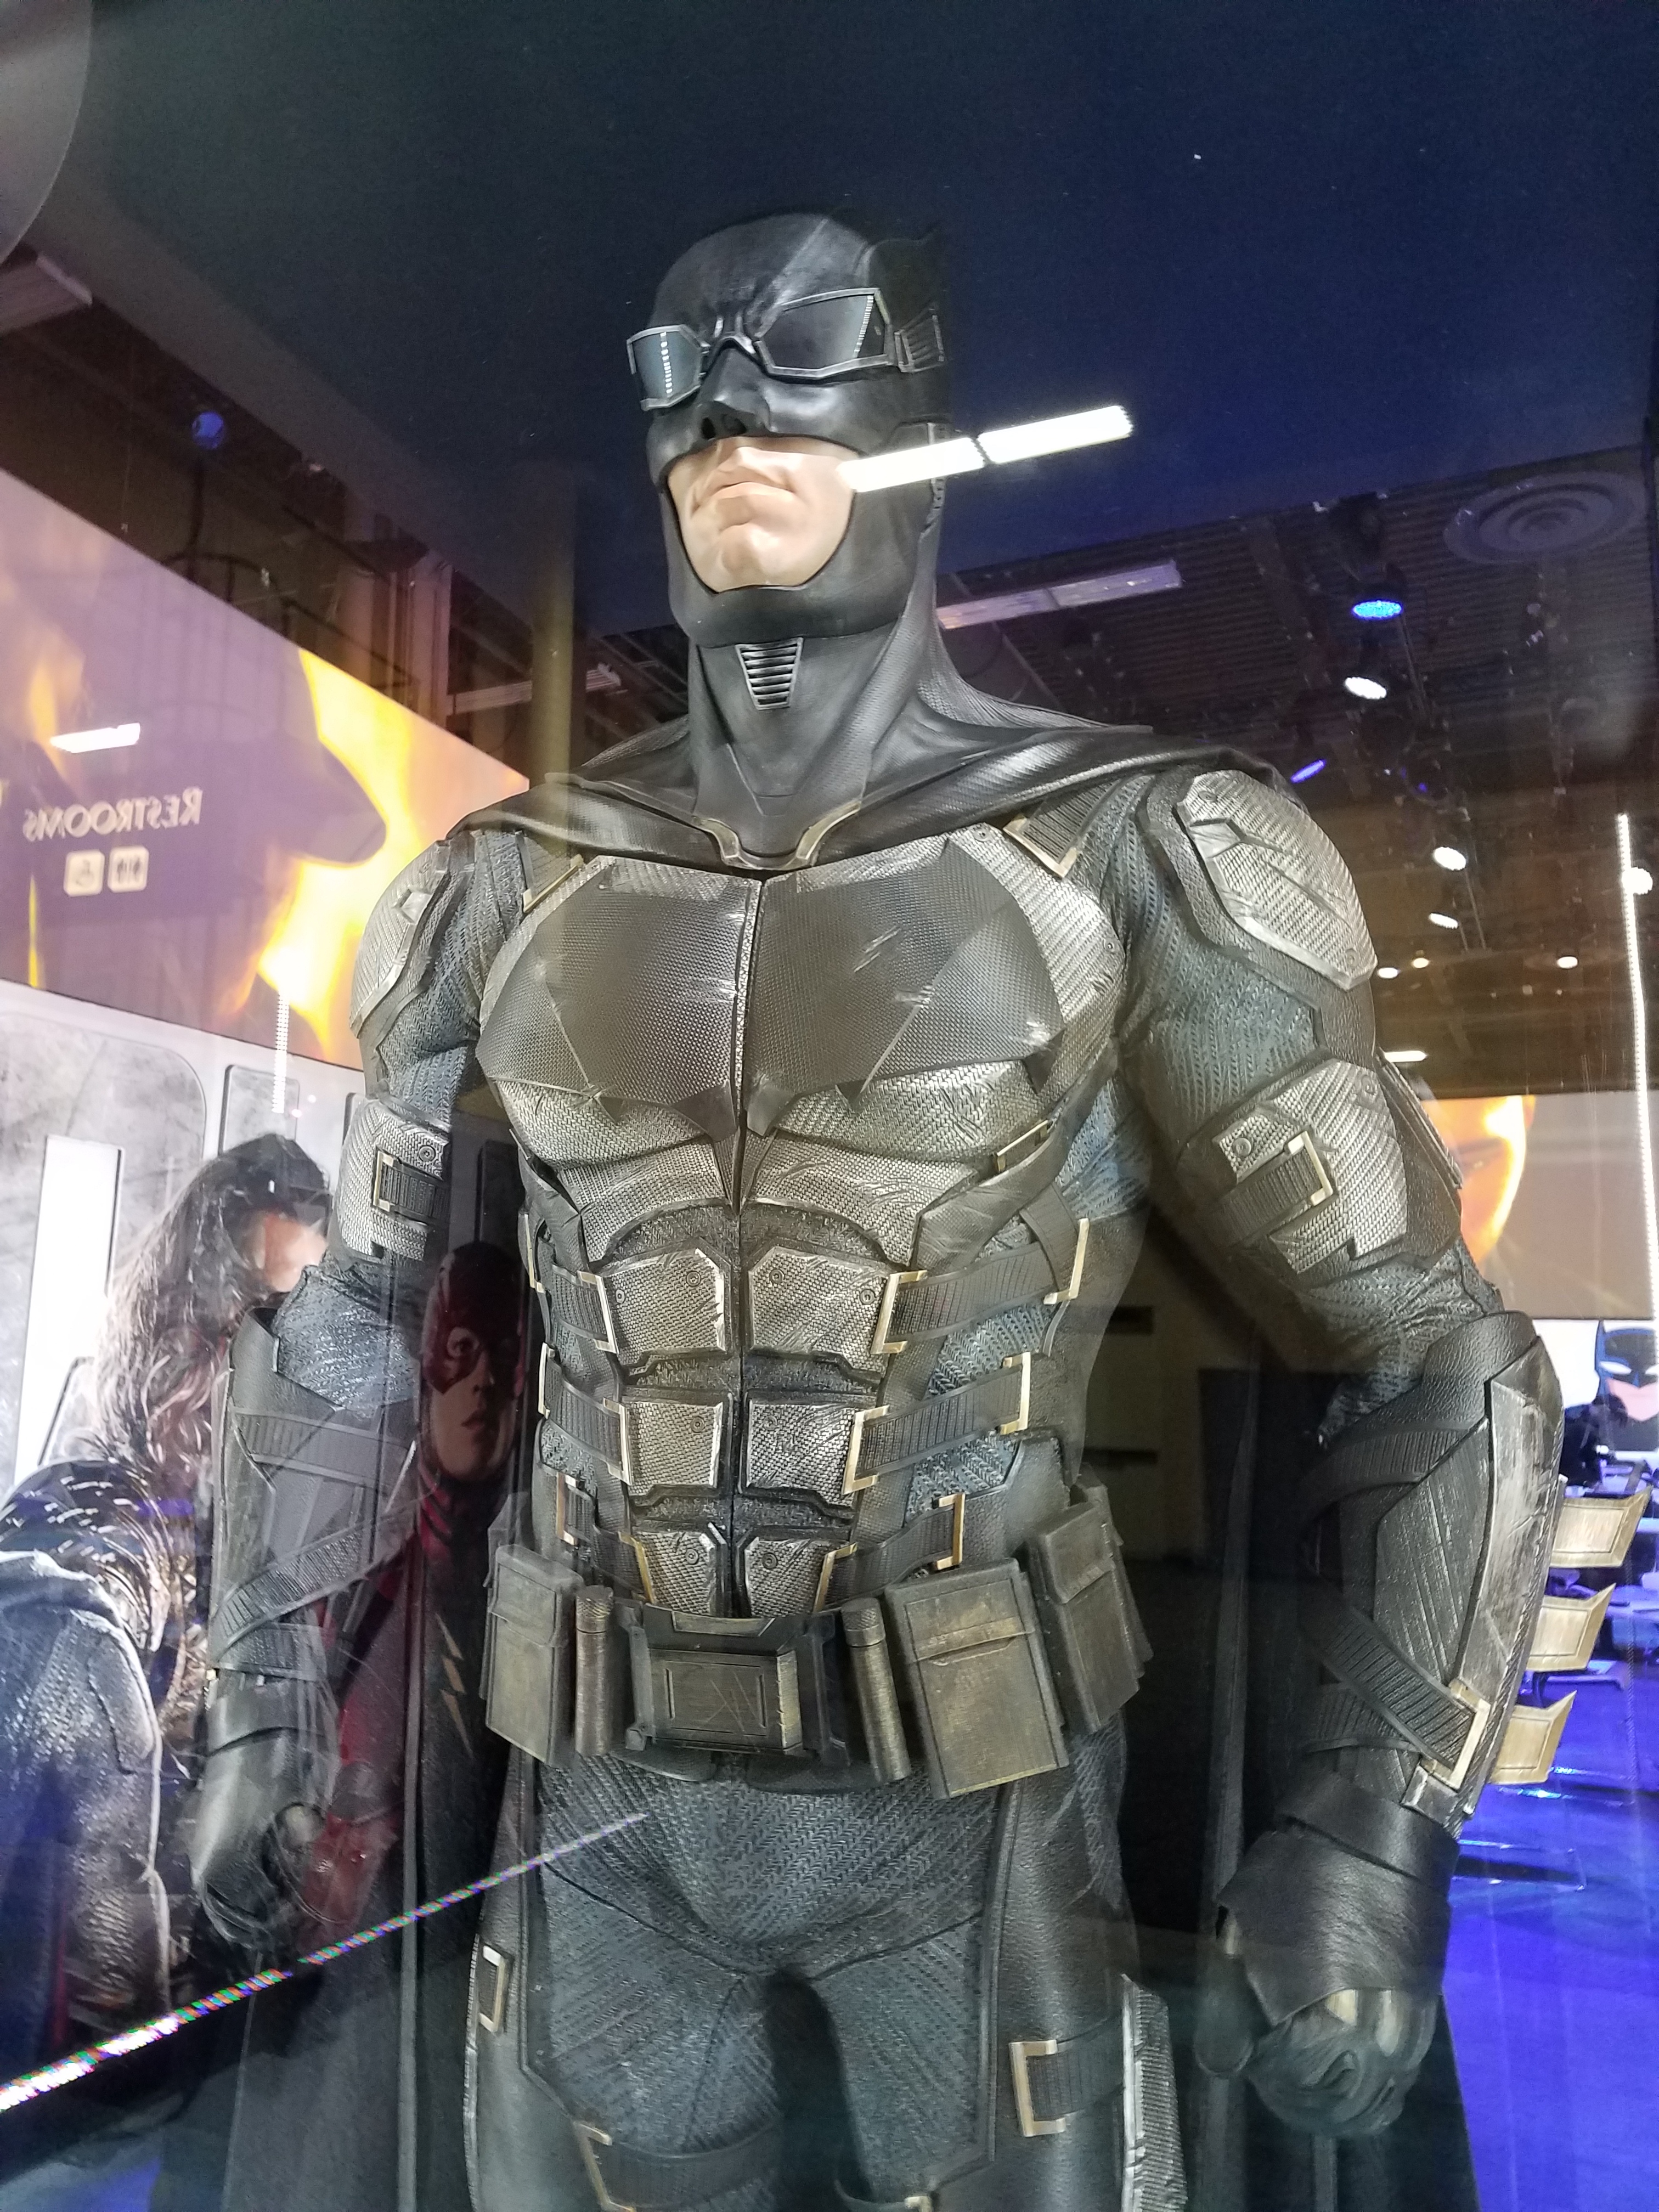 Looking for Justice League Tactical Batsuit reference photos or models |  RPF Costume and Prop Maker Community